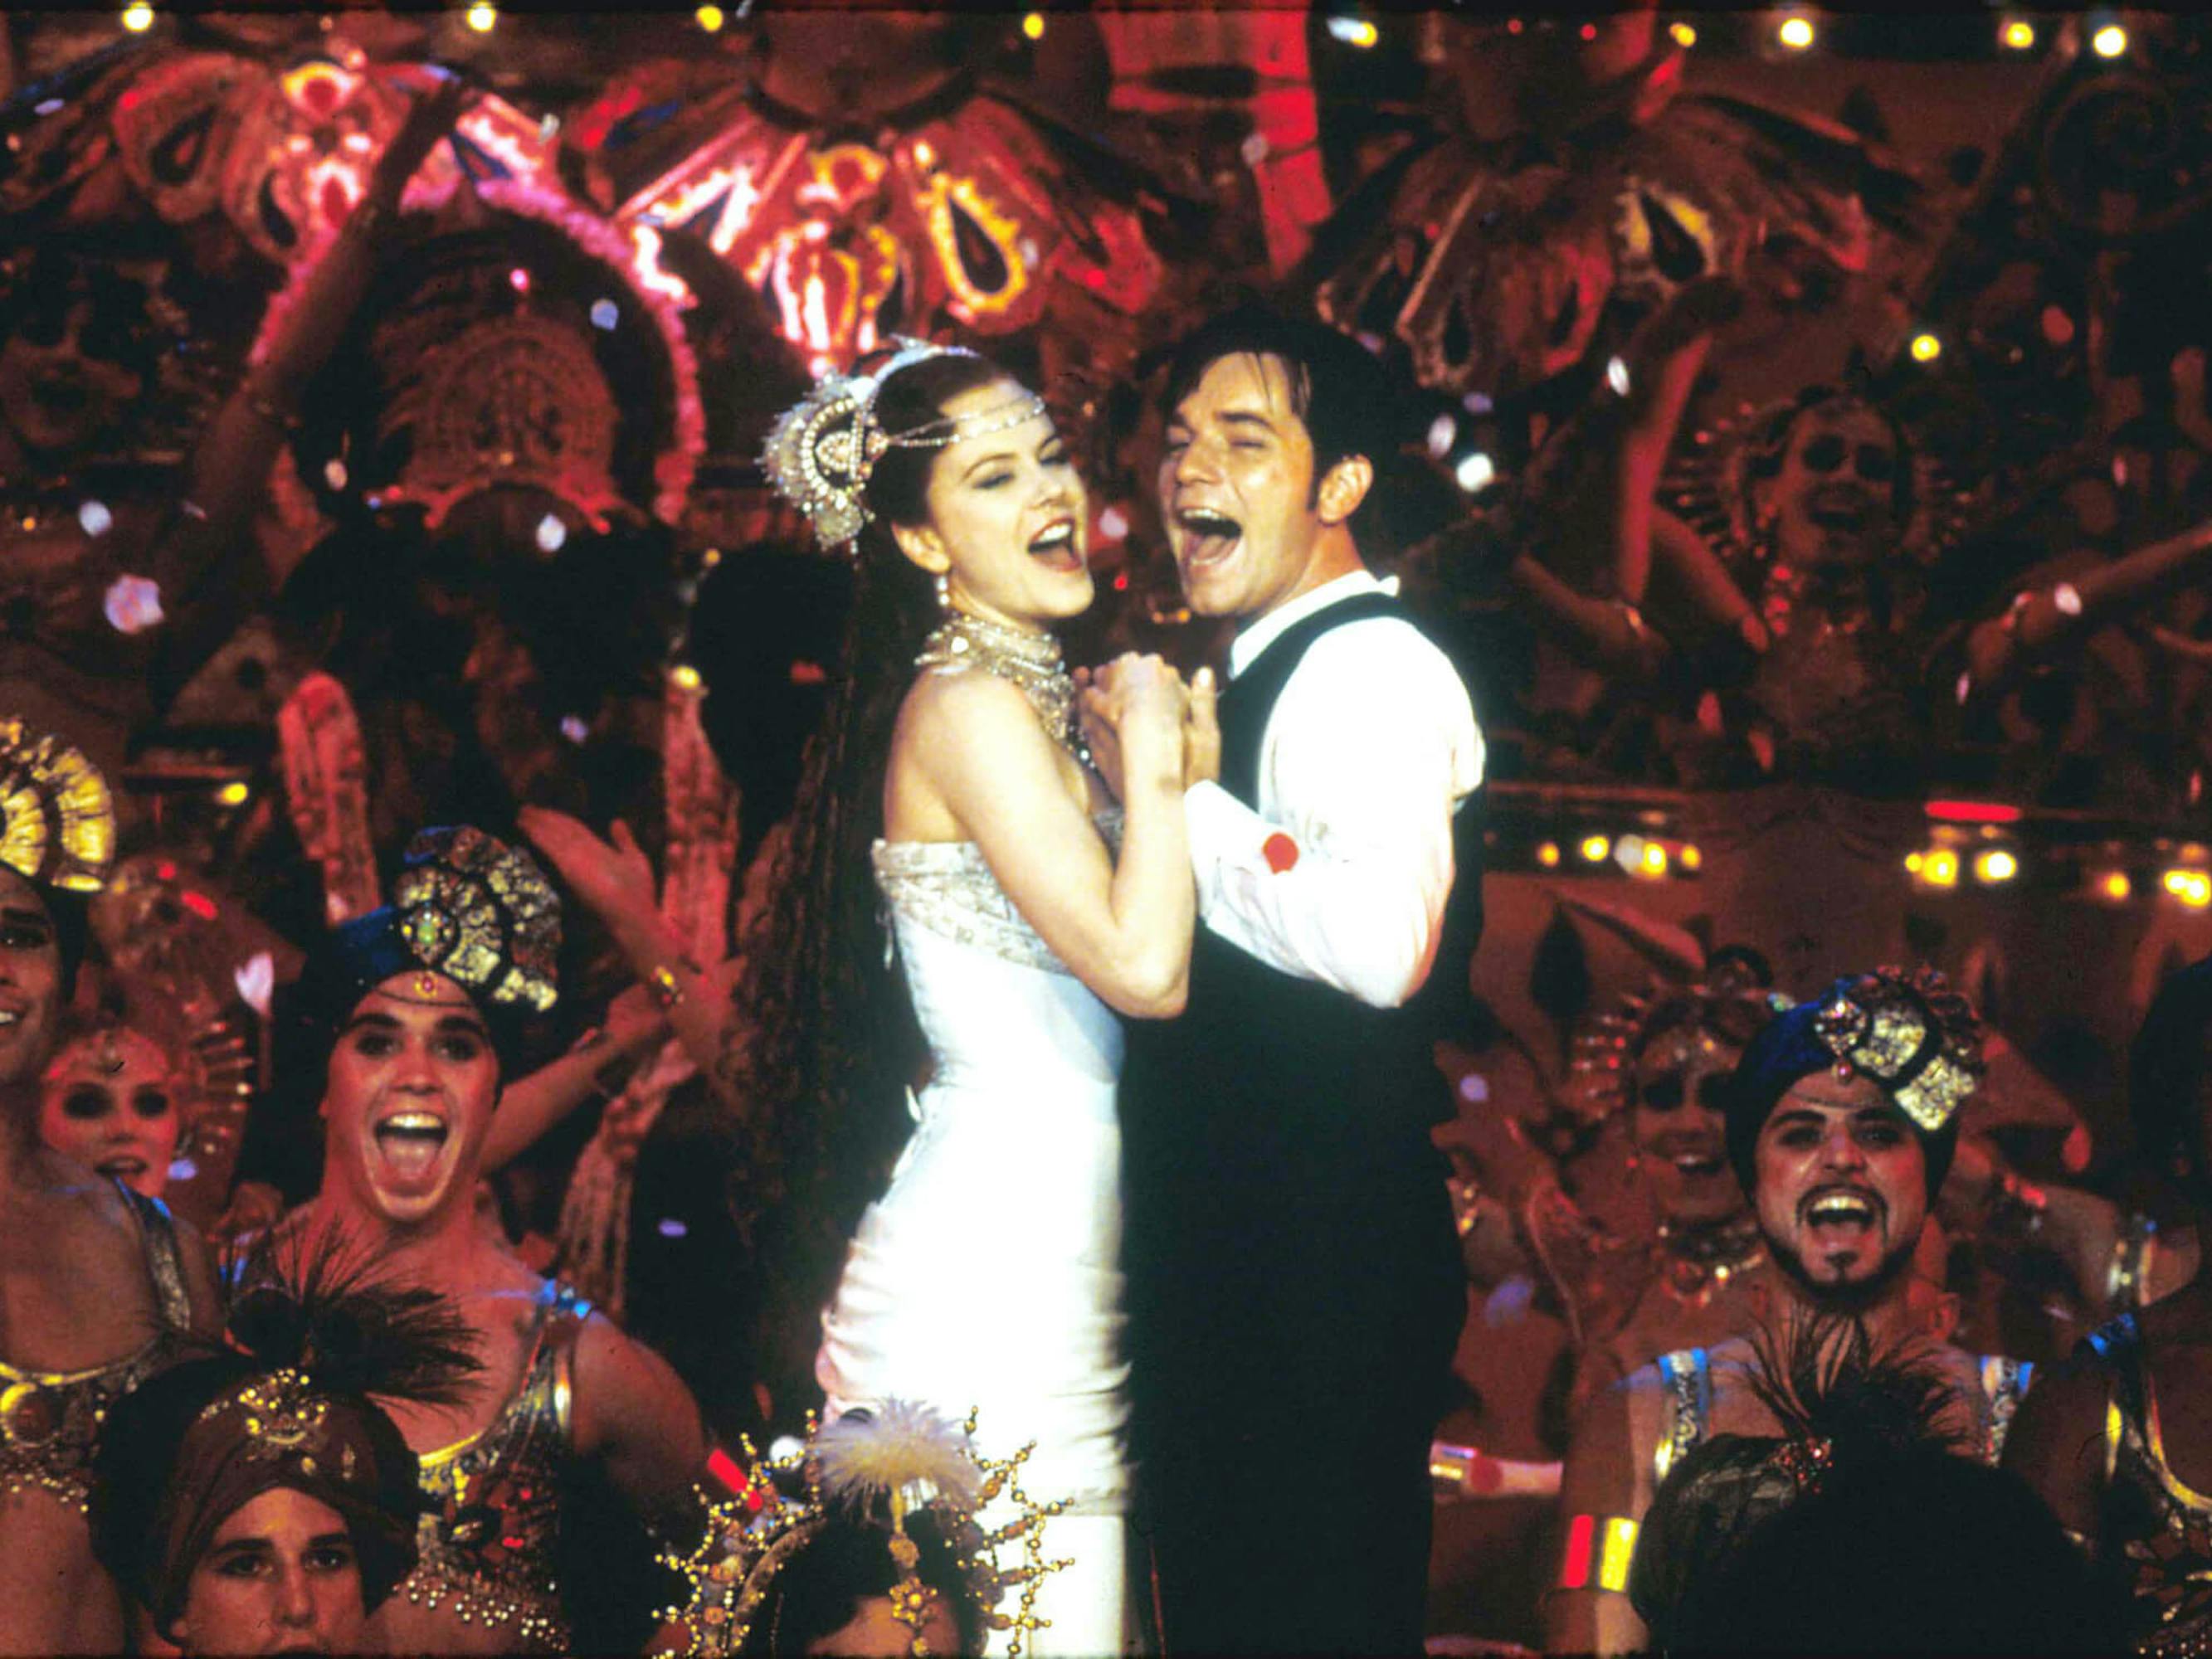 Satine (Nicole Kidman) and Christian (Ewan McGregor) in Moulin Rouge! He wears a suit, and she wears a white dress. People’s faces dot the background in this energetic shot.